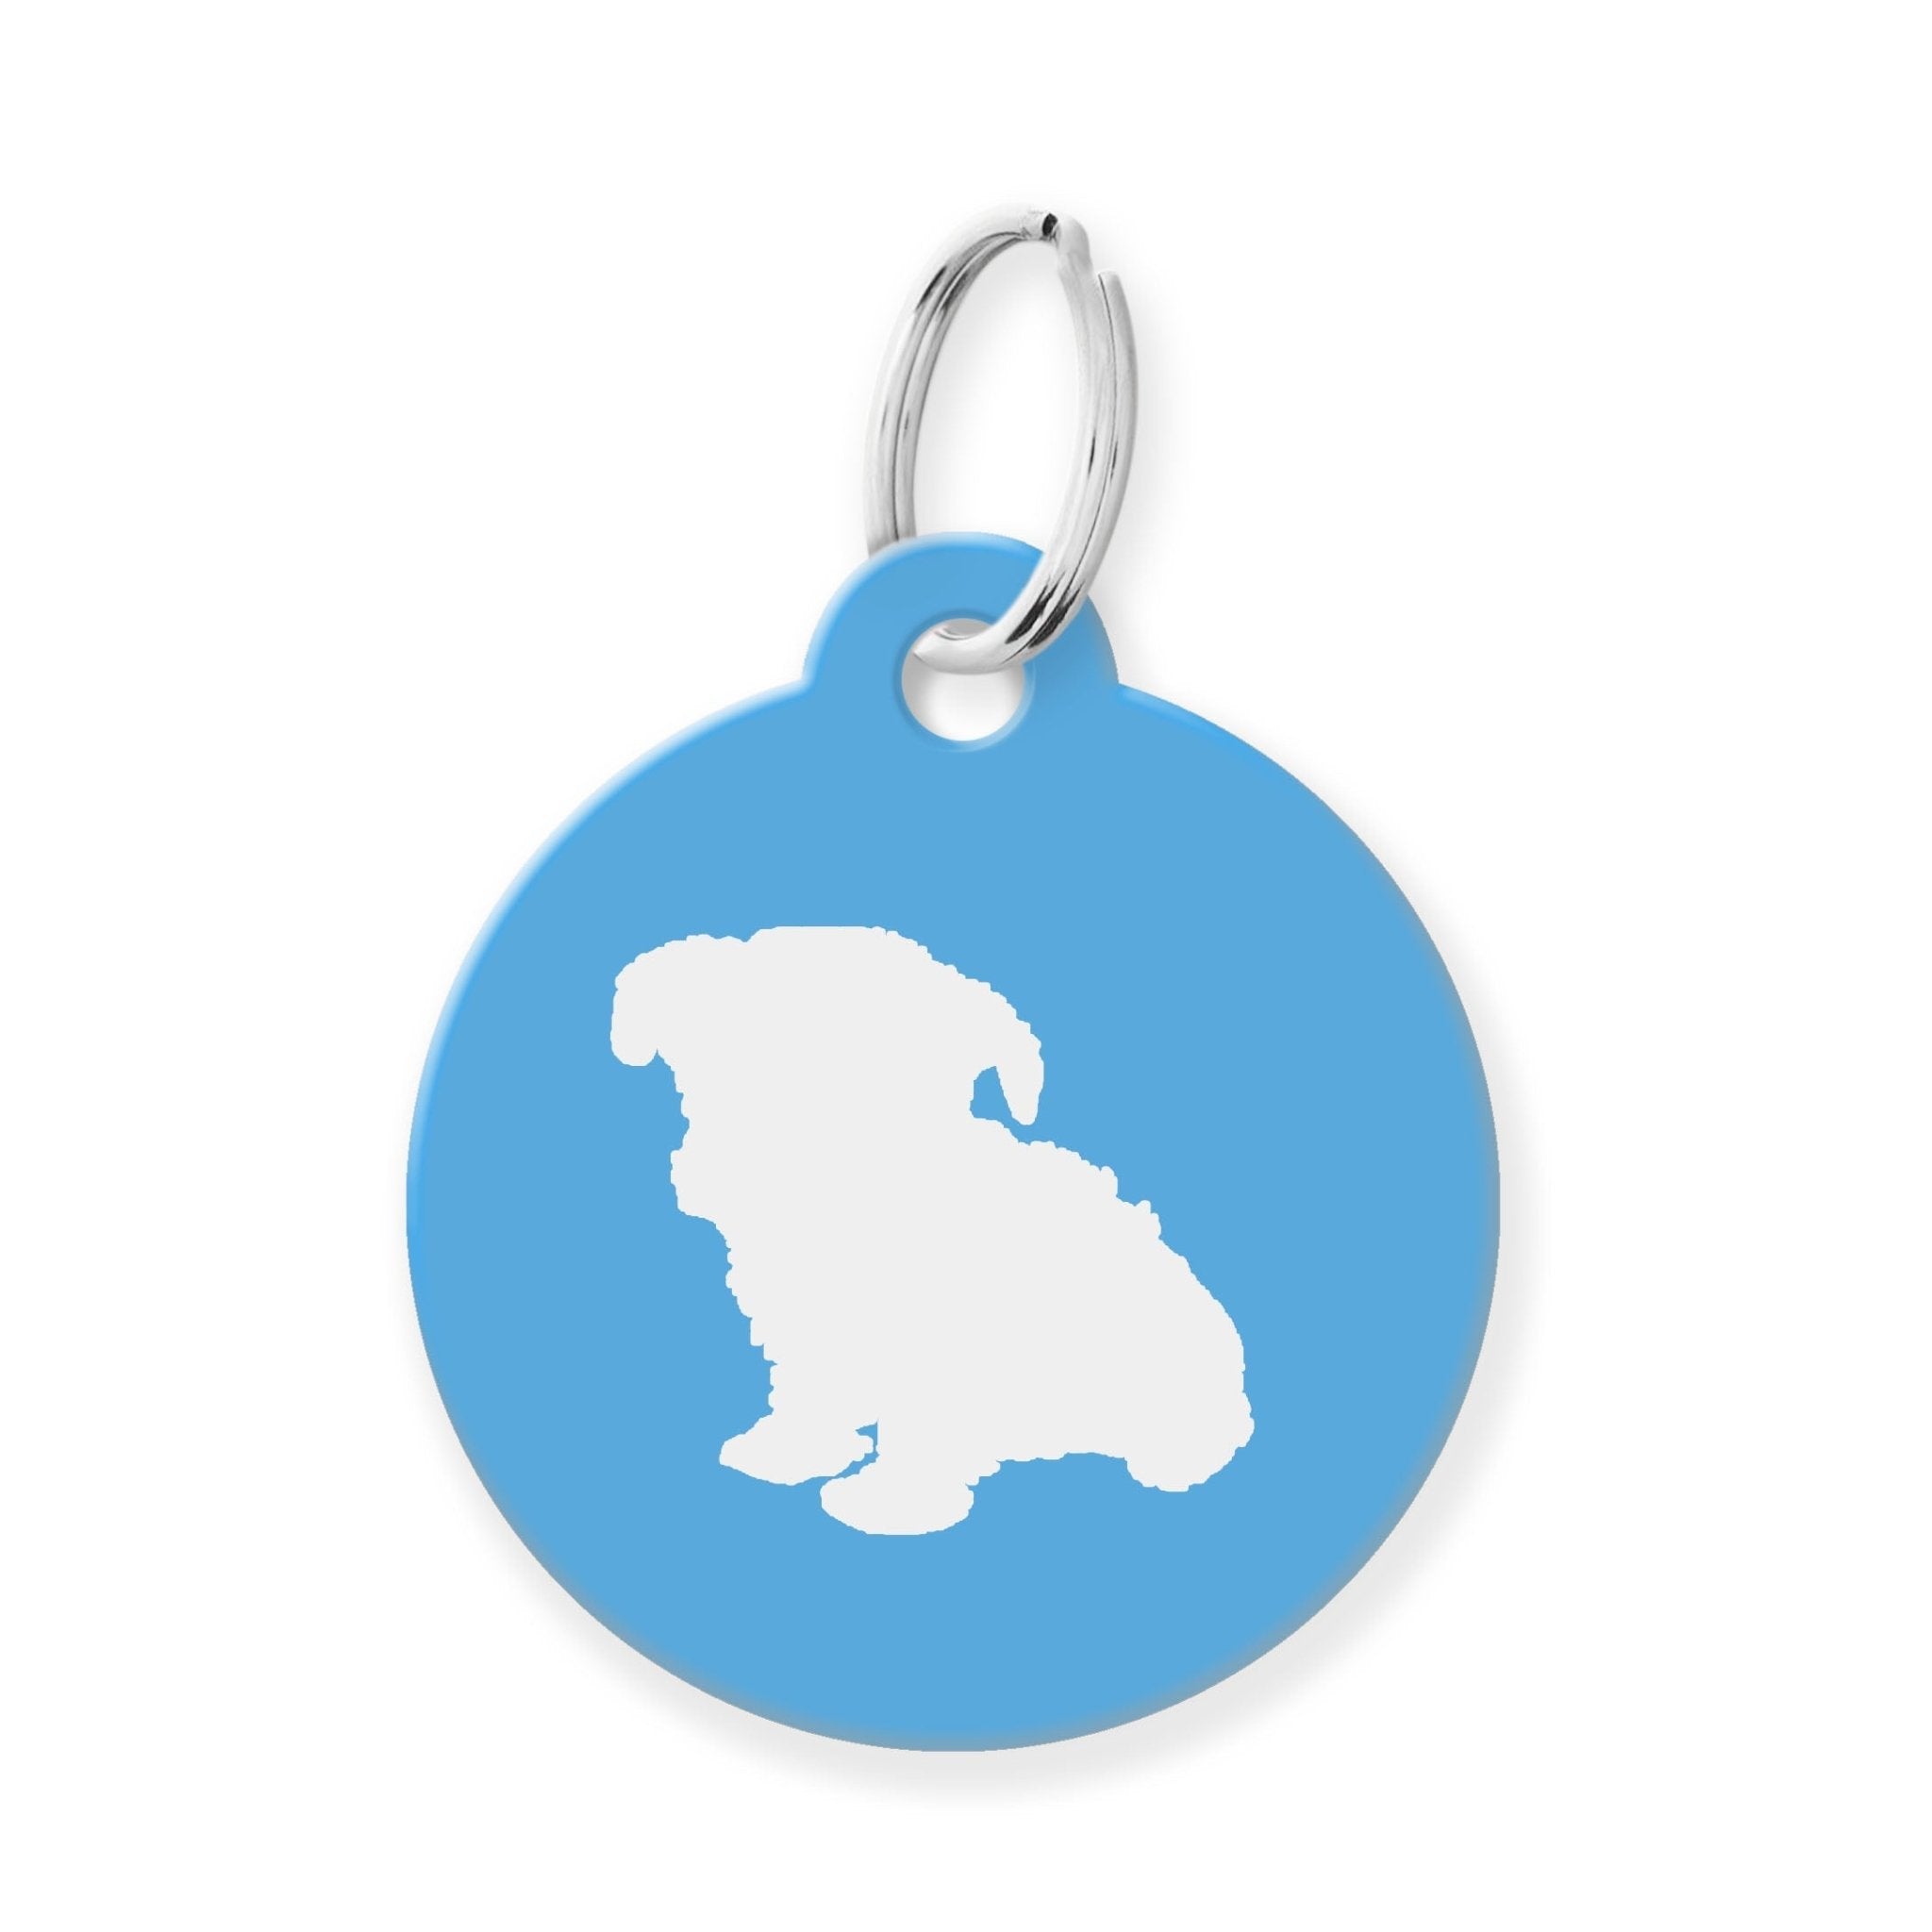 Yorkie Poodle Silhouette Pet Tag - The Barking Mutt